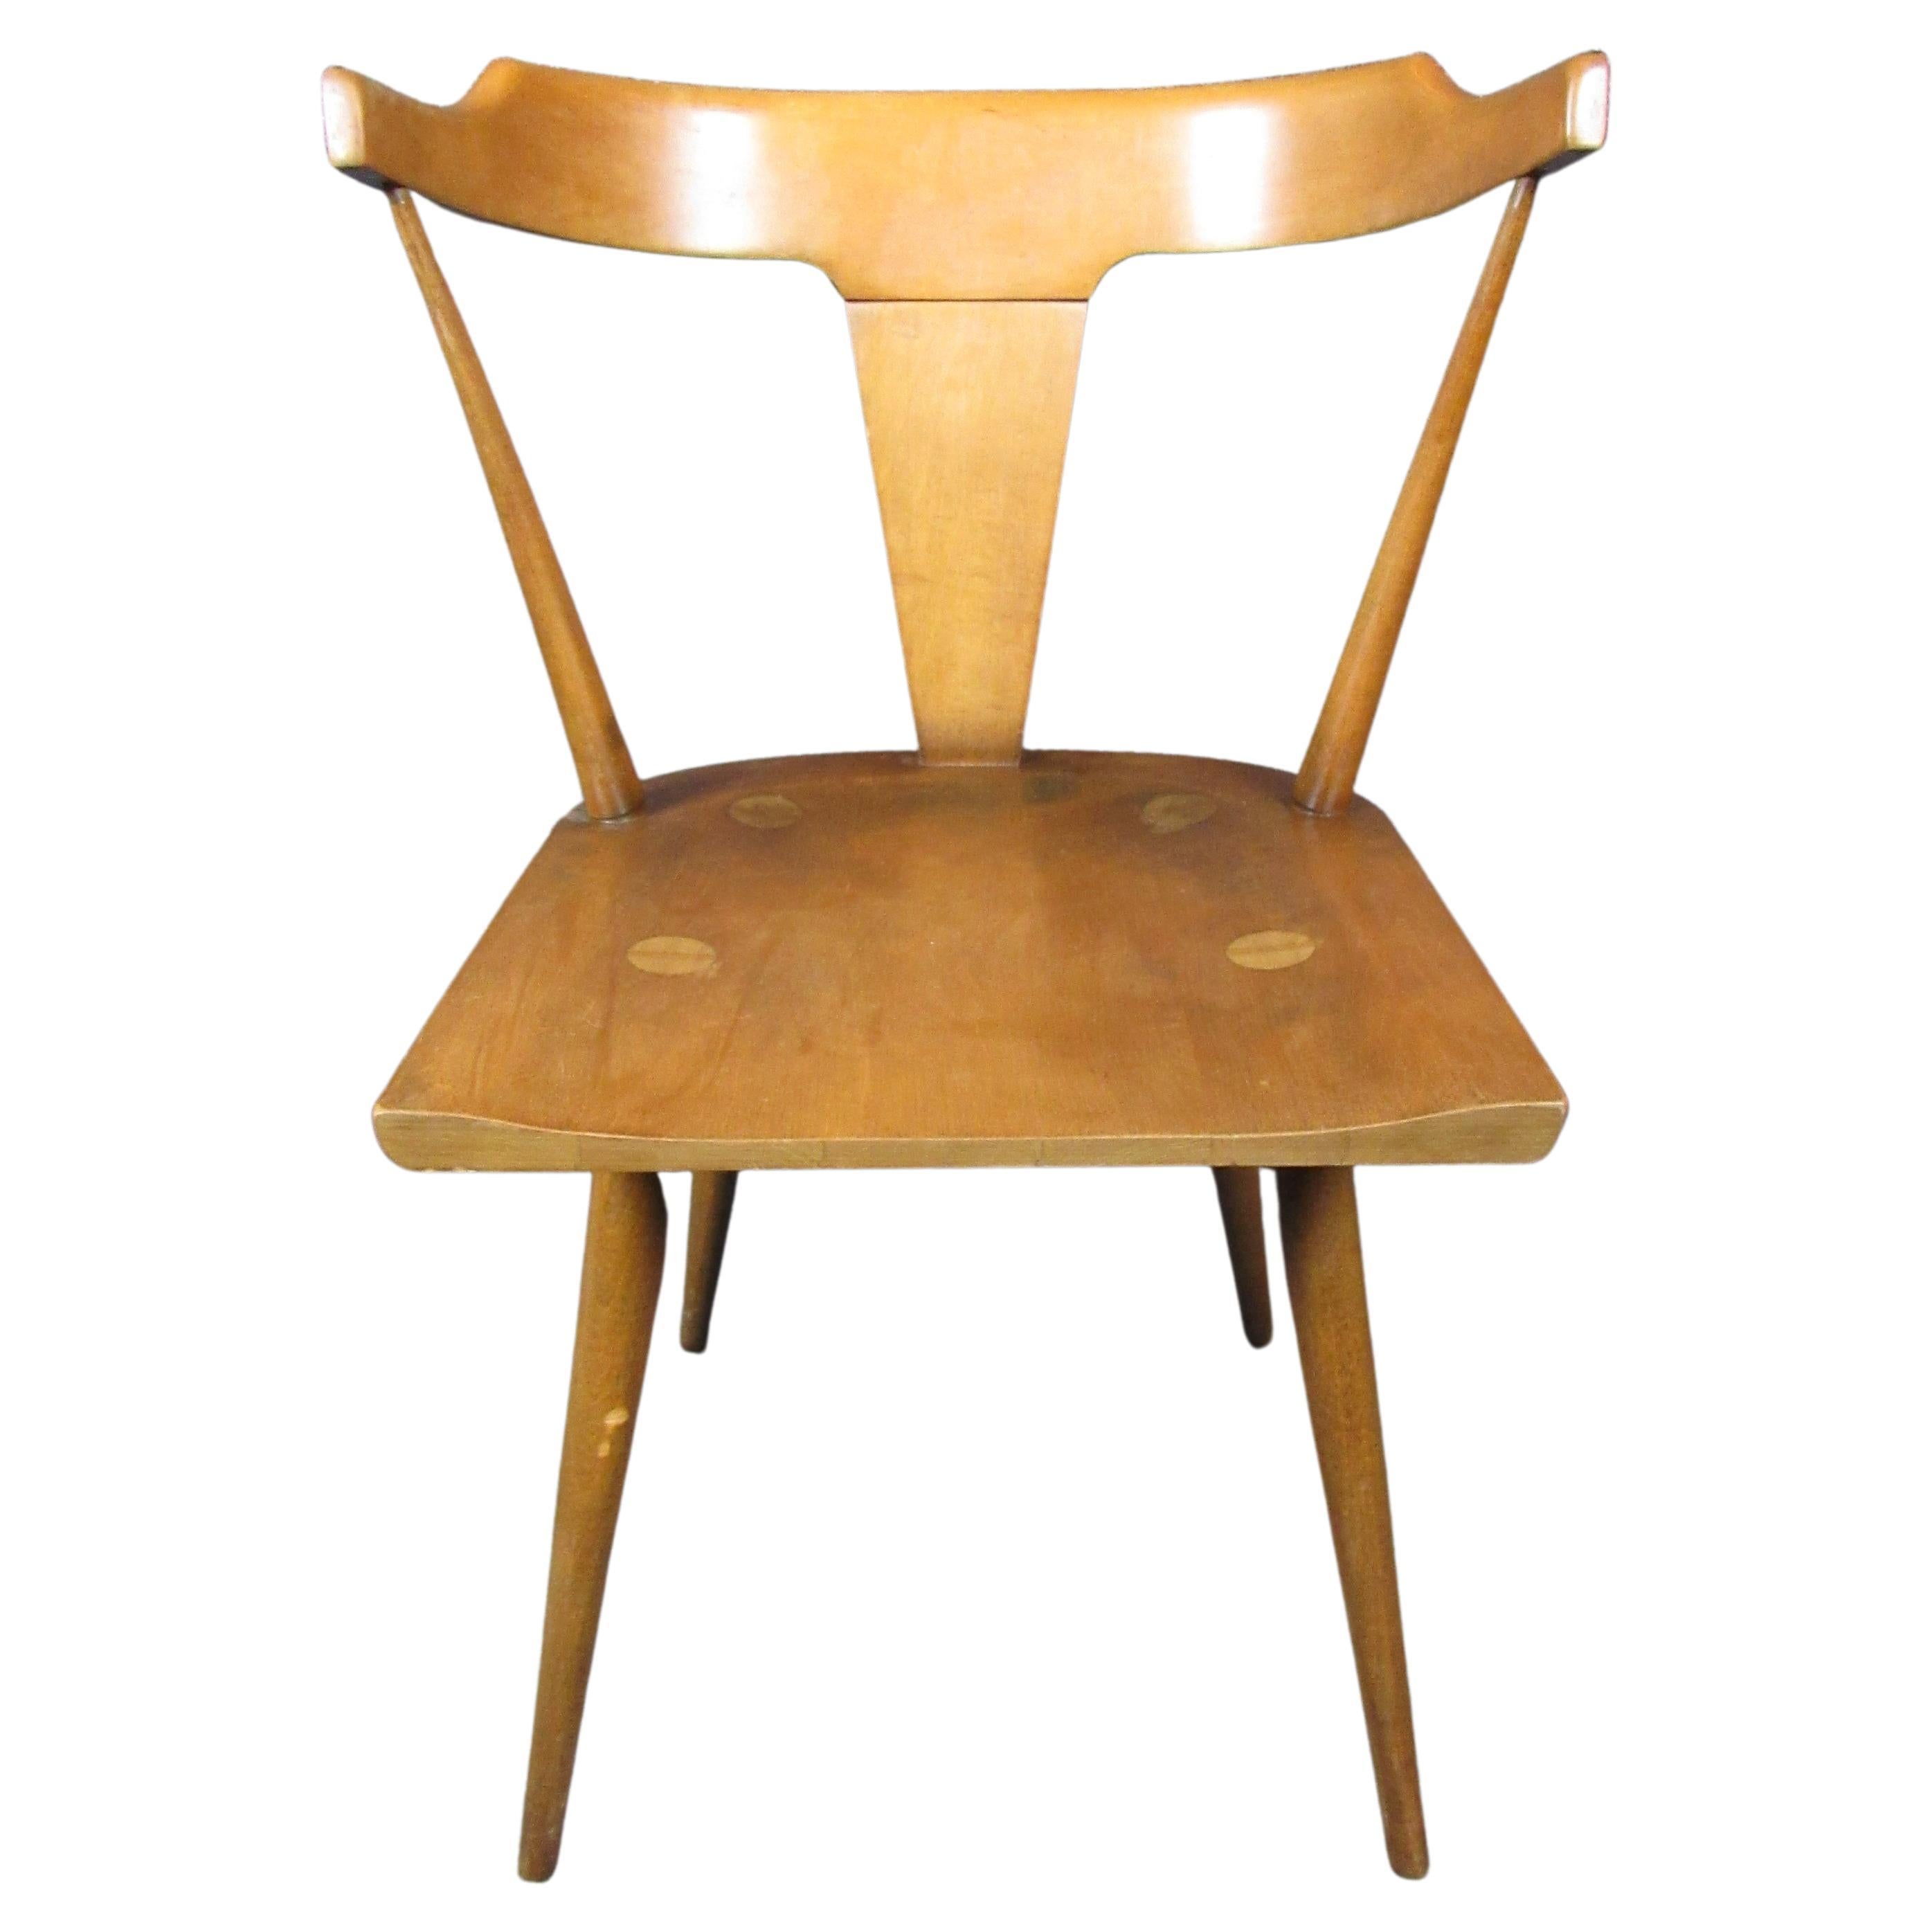 Bring home authentic Mid-Century Modern design with this fantastic chair by Paul McCobb for the Planner Group. Featuring the golden maple wood grain, turned peglegs, and Windsor-inspired spindles that made McCobb famous, this wonderful seat sports a